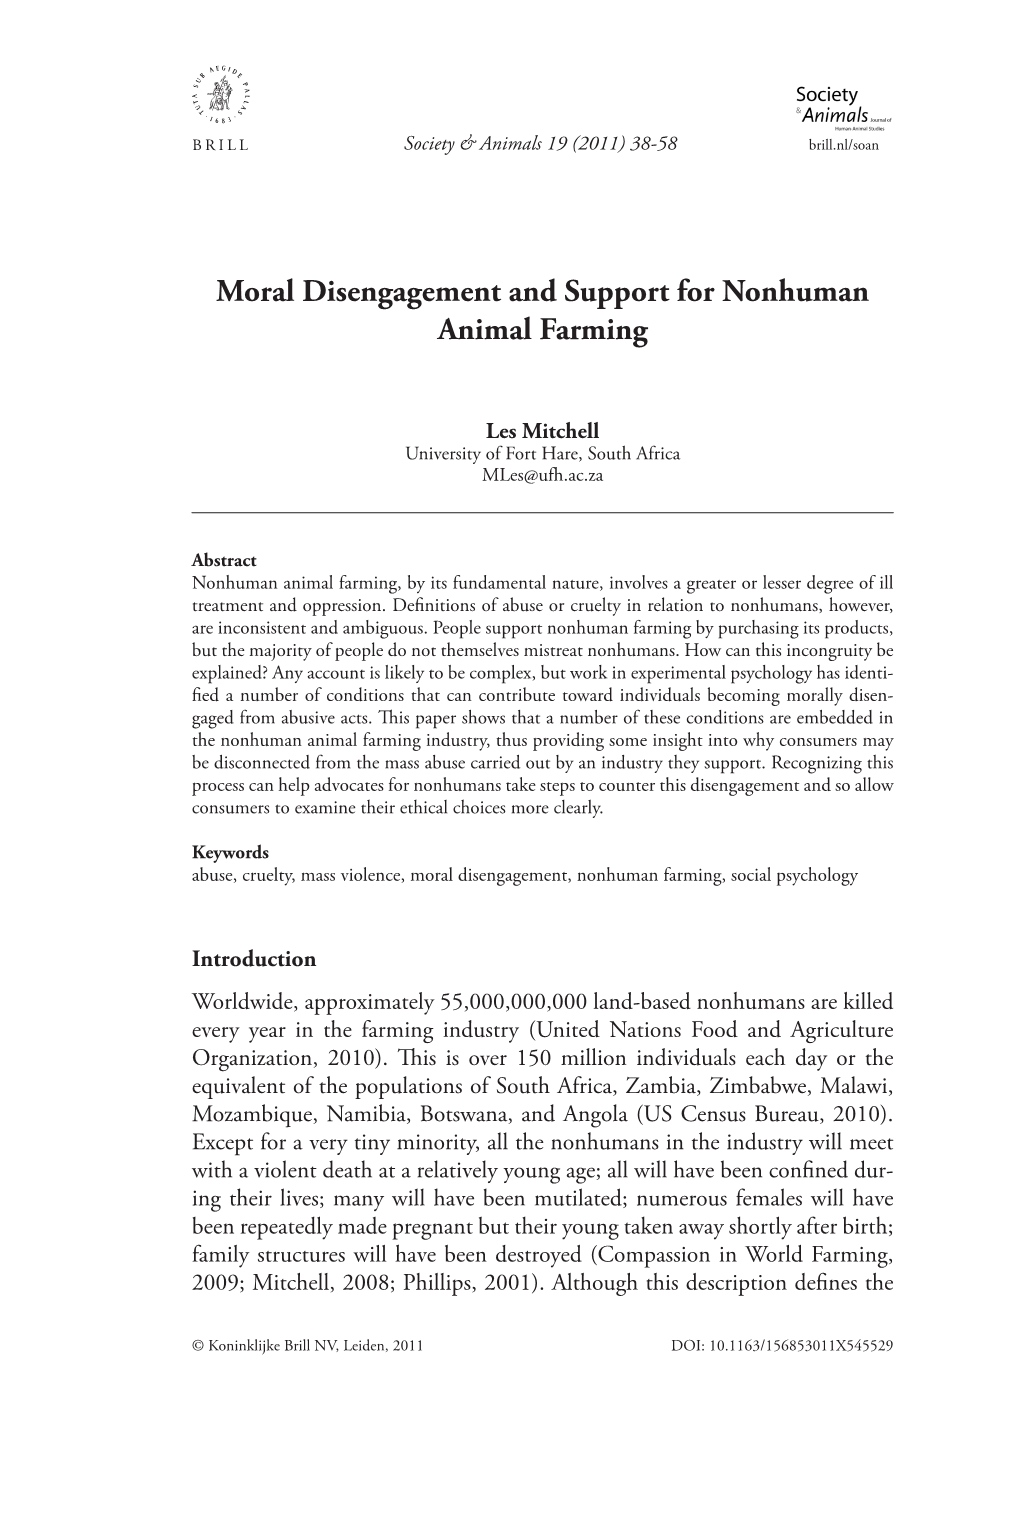 Moral Disengagement and Support for Nonhuman Animal Farming